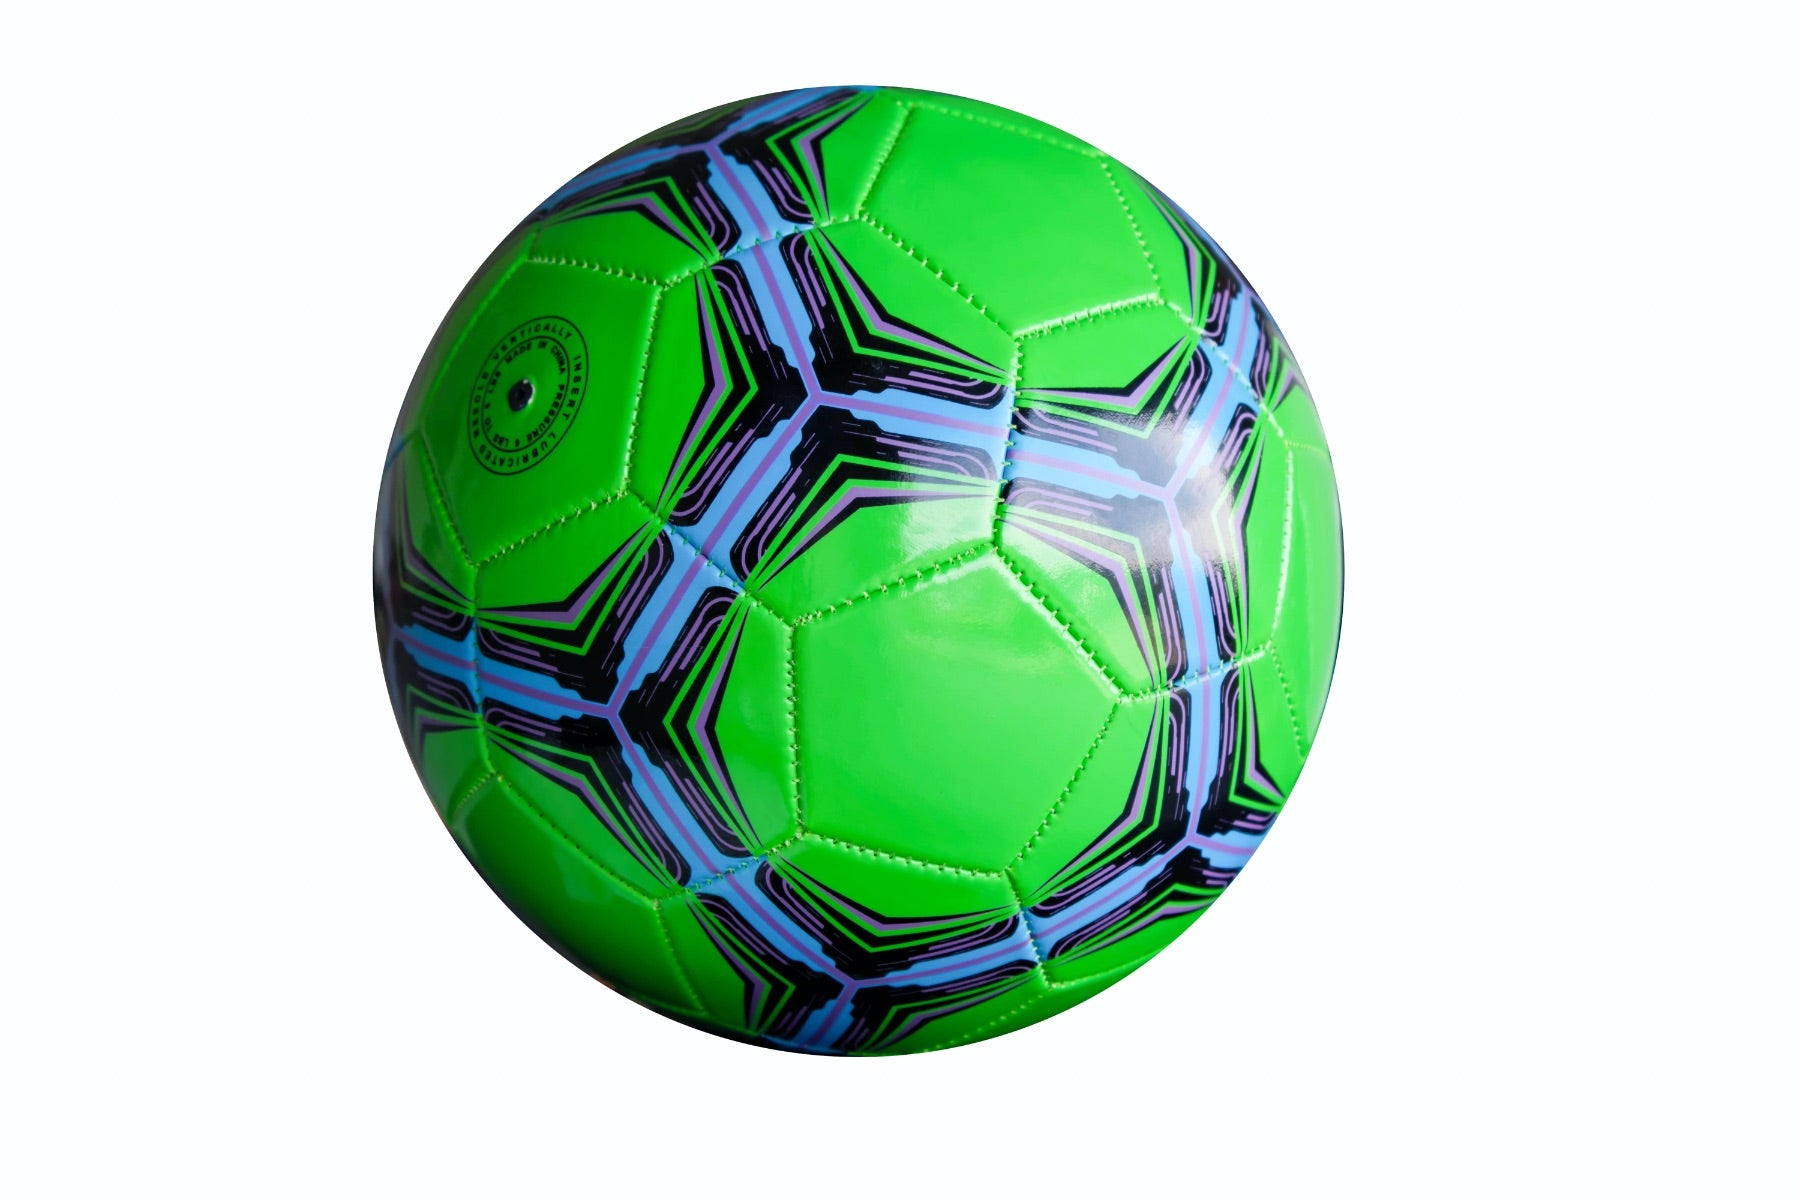 (Improved Quality) Western Star Custom Graphics Official Size 4 and Size 5 Soccer Balls